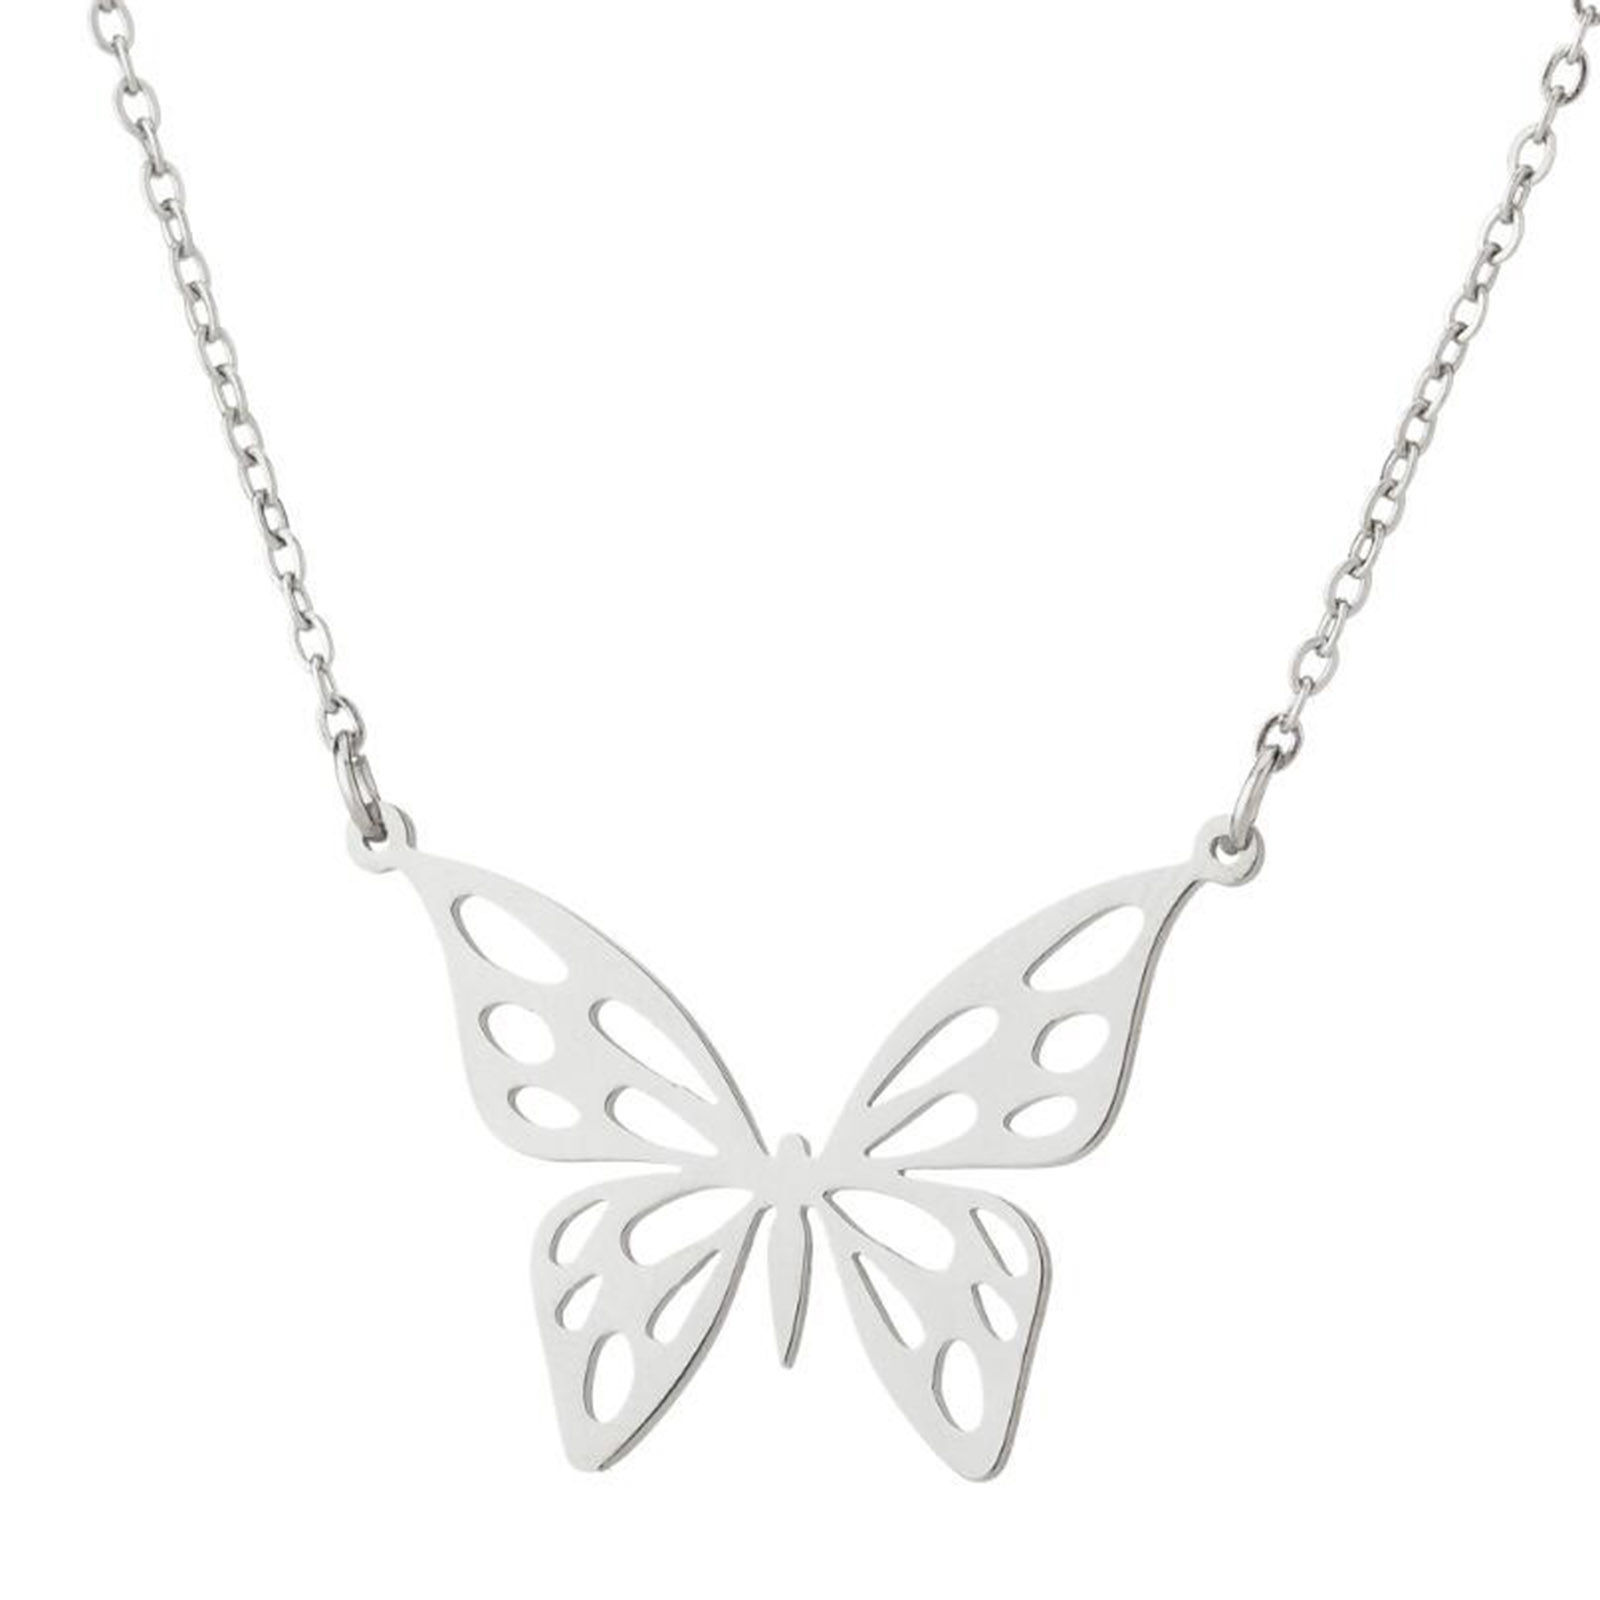 Picture of 304 Stainless Steel Insect Link Cable Chain Necklace Silver Tone Butterfly Animal 45cm(17 6/8") long, 1 Piece